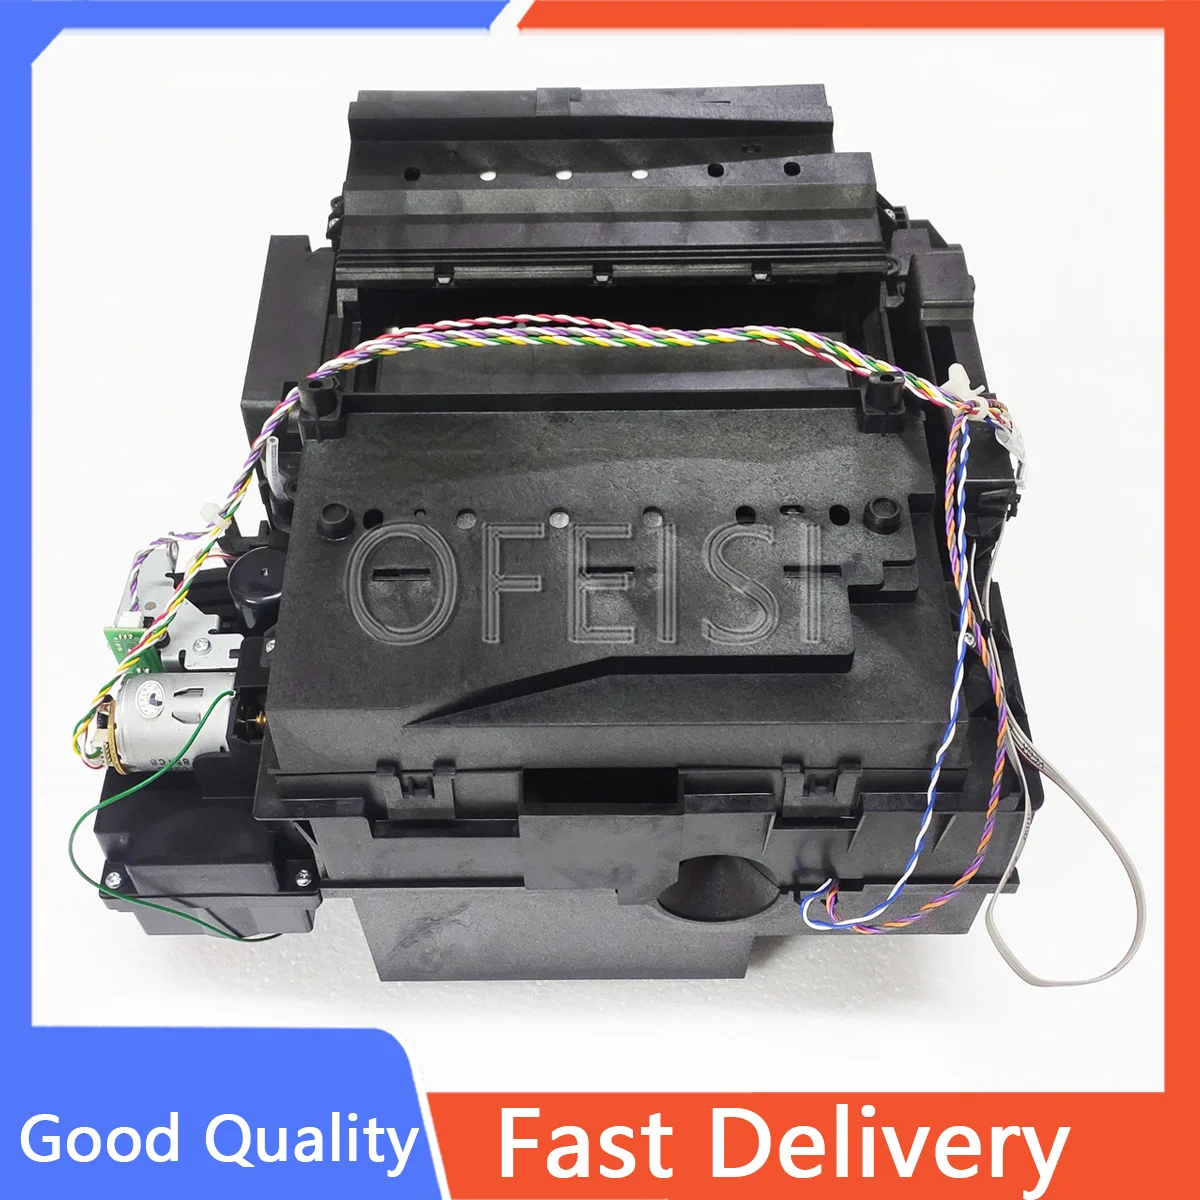 Q6683-60187 Service station assembly Fit for HP DesignJet T1100 T610 T1100PS 610 